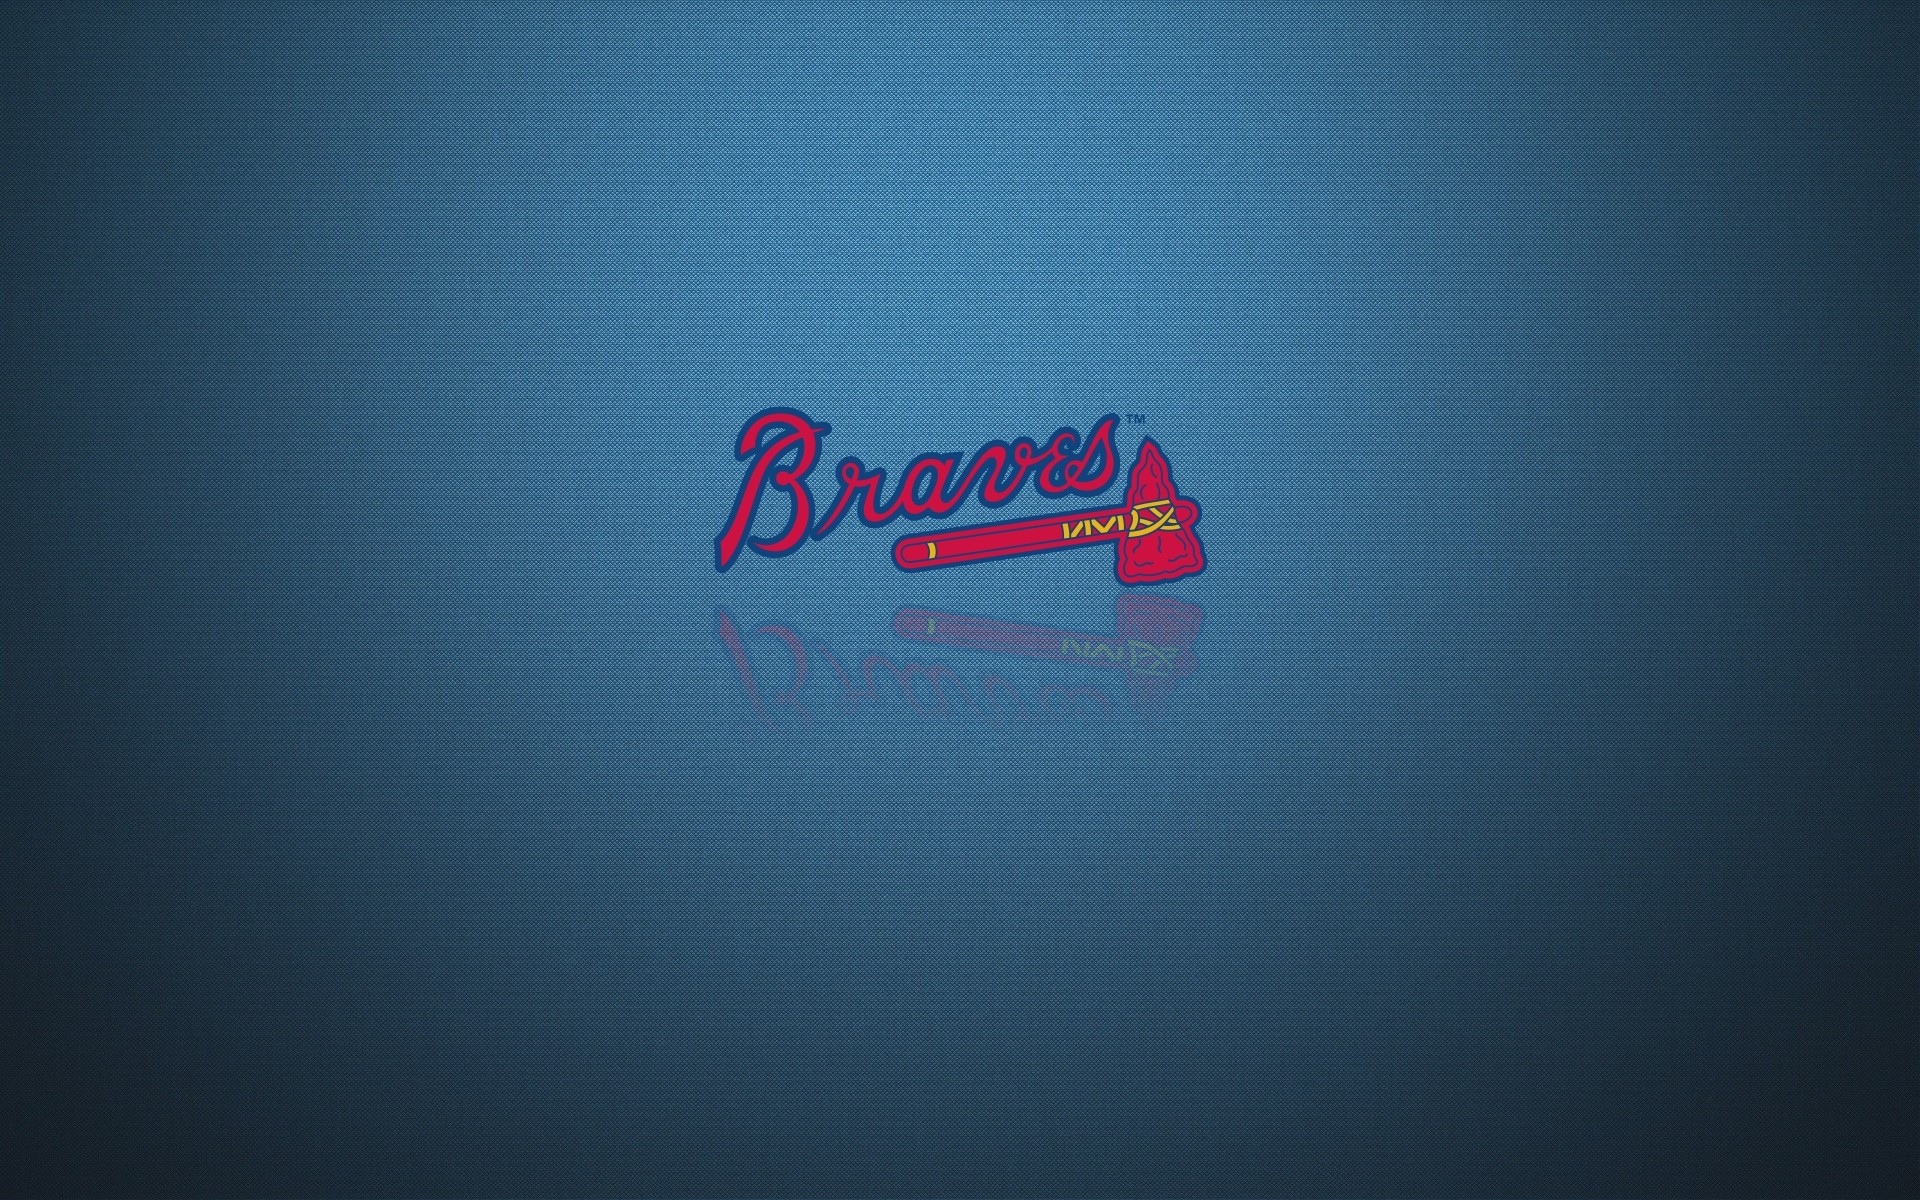 1920x1200 Cool Collections of Atlanta Braves Backgrounds For Desktop, Laptop and  Mobiles. Here You Can Download More than 5 Million Photography collections  Uploaded ...